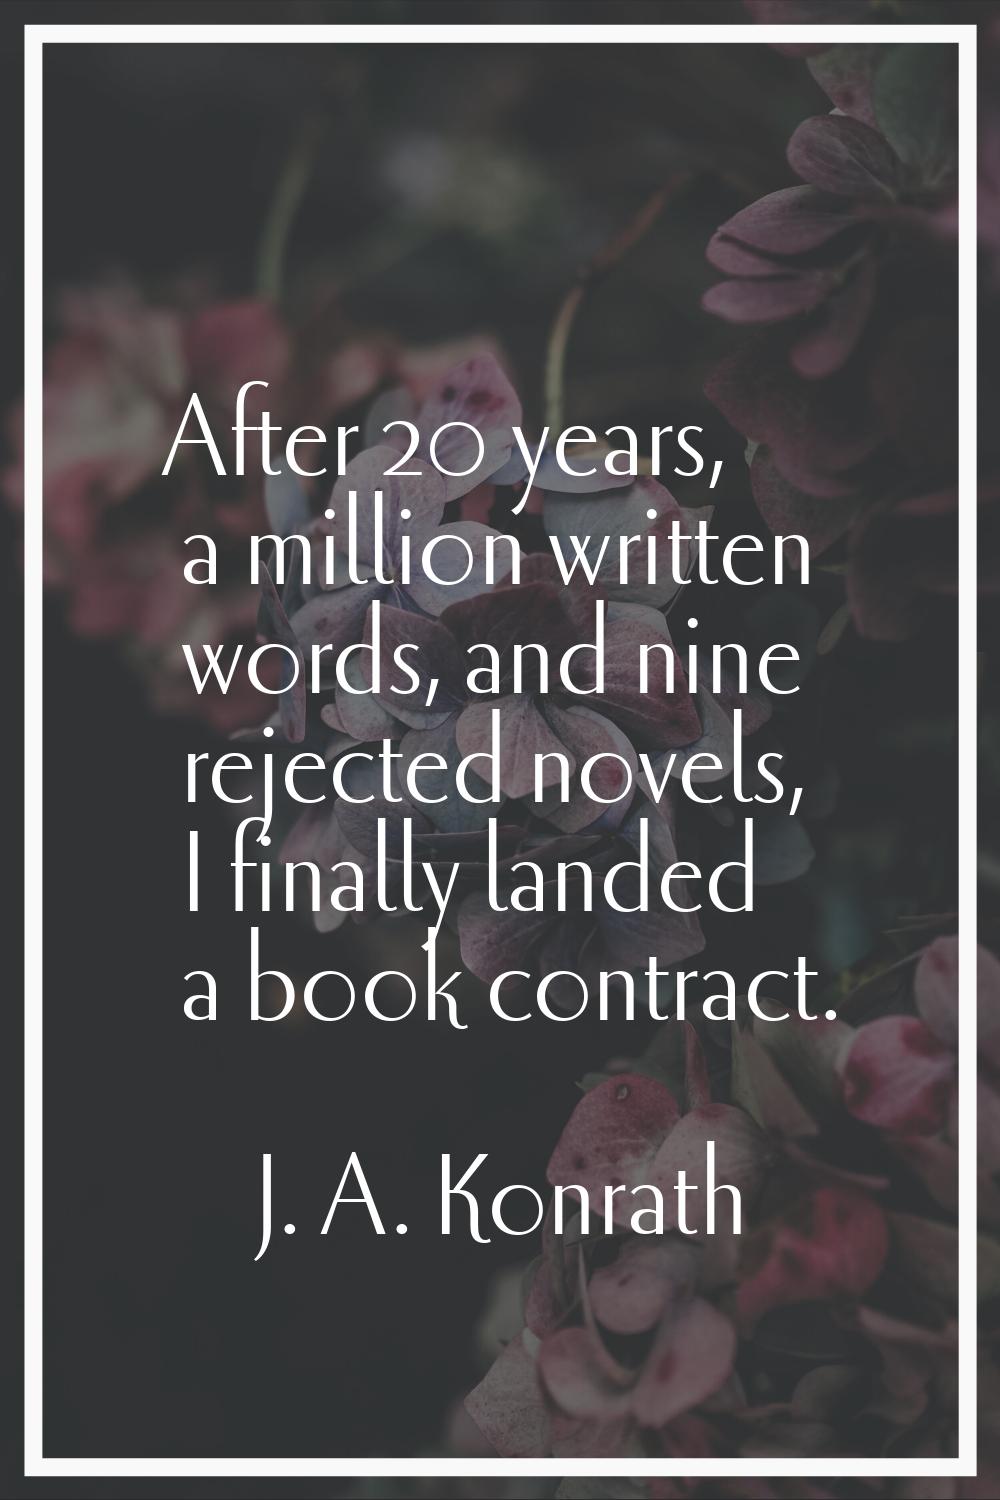 After 20 years, a million written words, and nine rejected novels, I finally landed a book contract